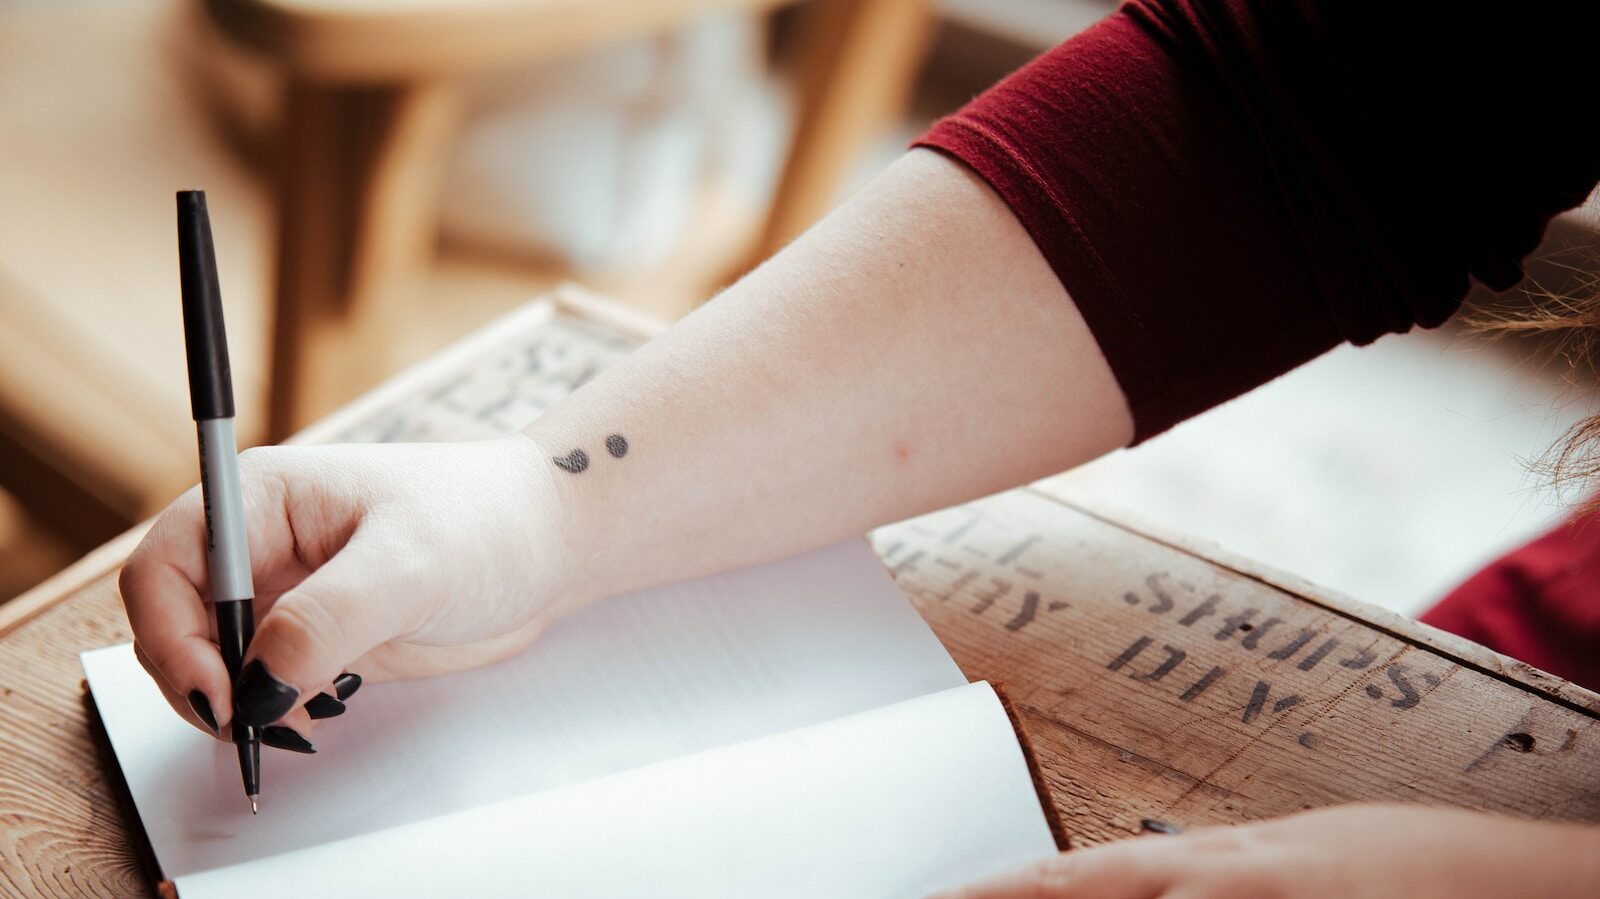 The Meaning Behind a Semicolon Tattoo